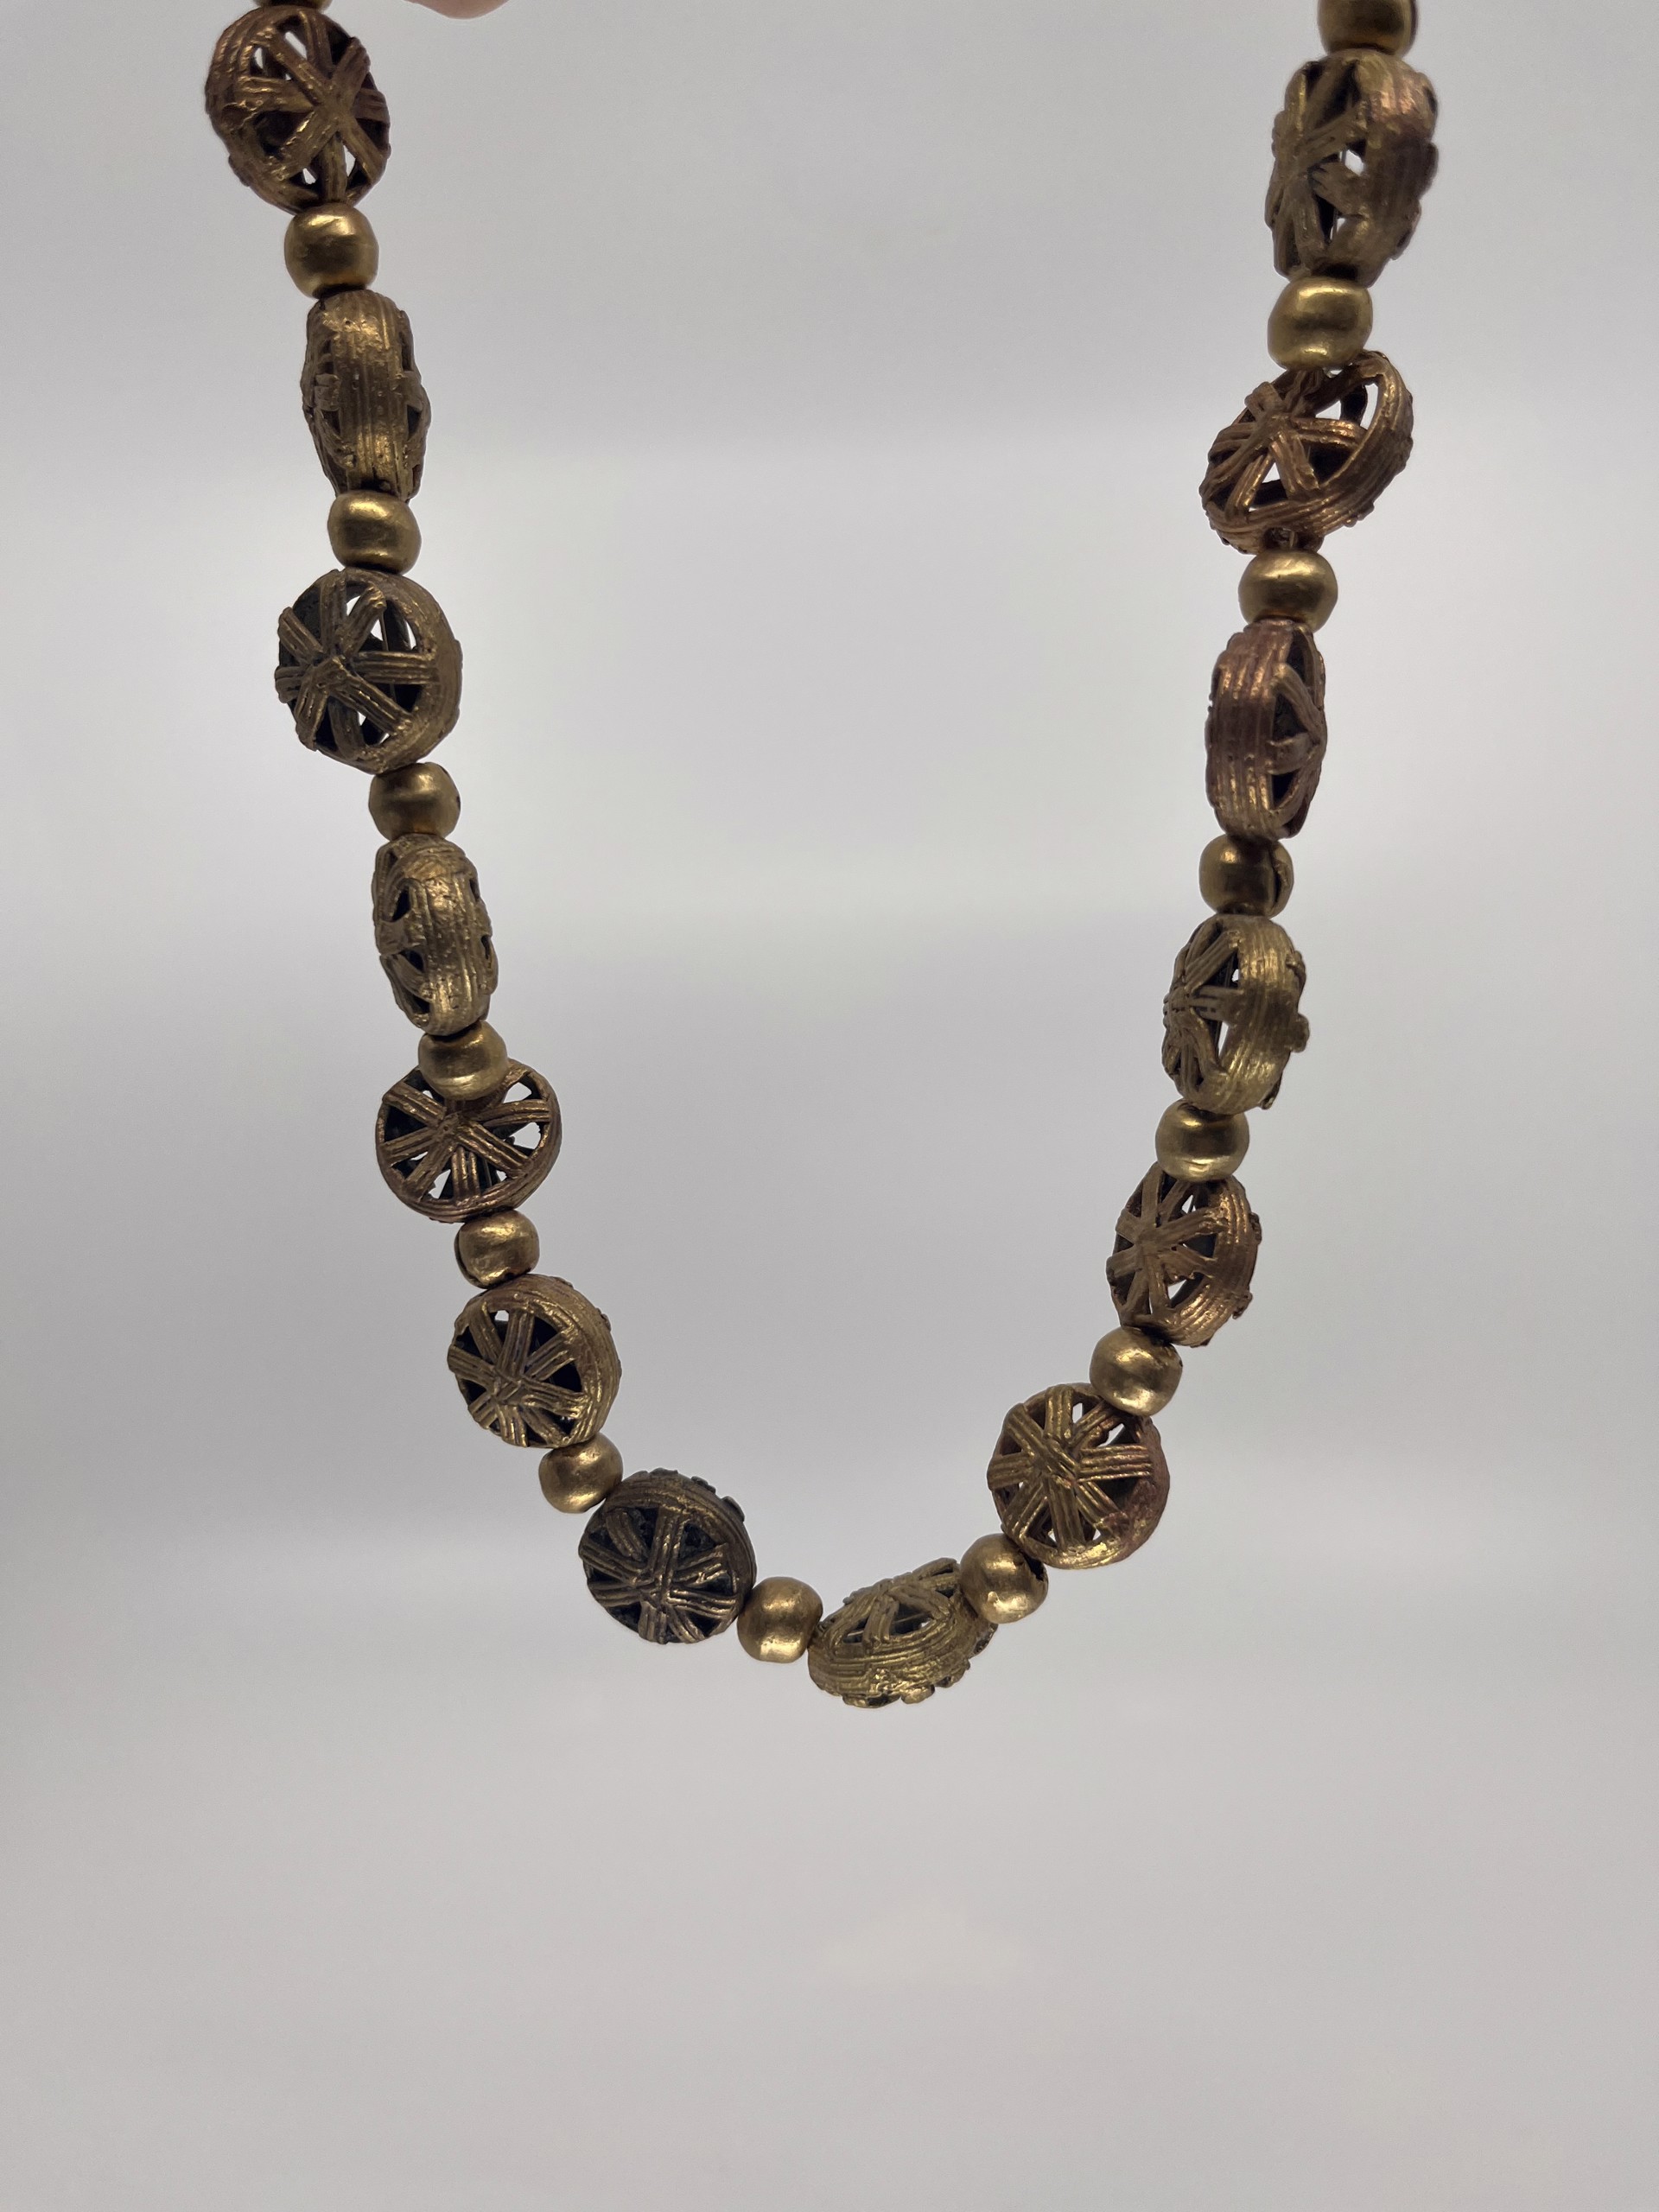 9143 Moroccan Brass Wheel  Beads by Gina Caruso